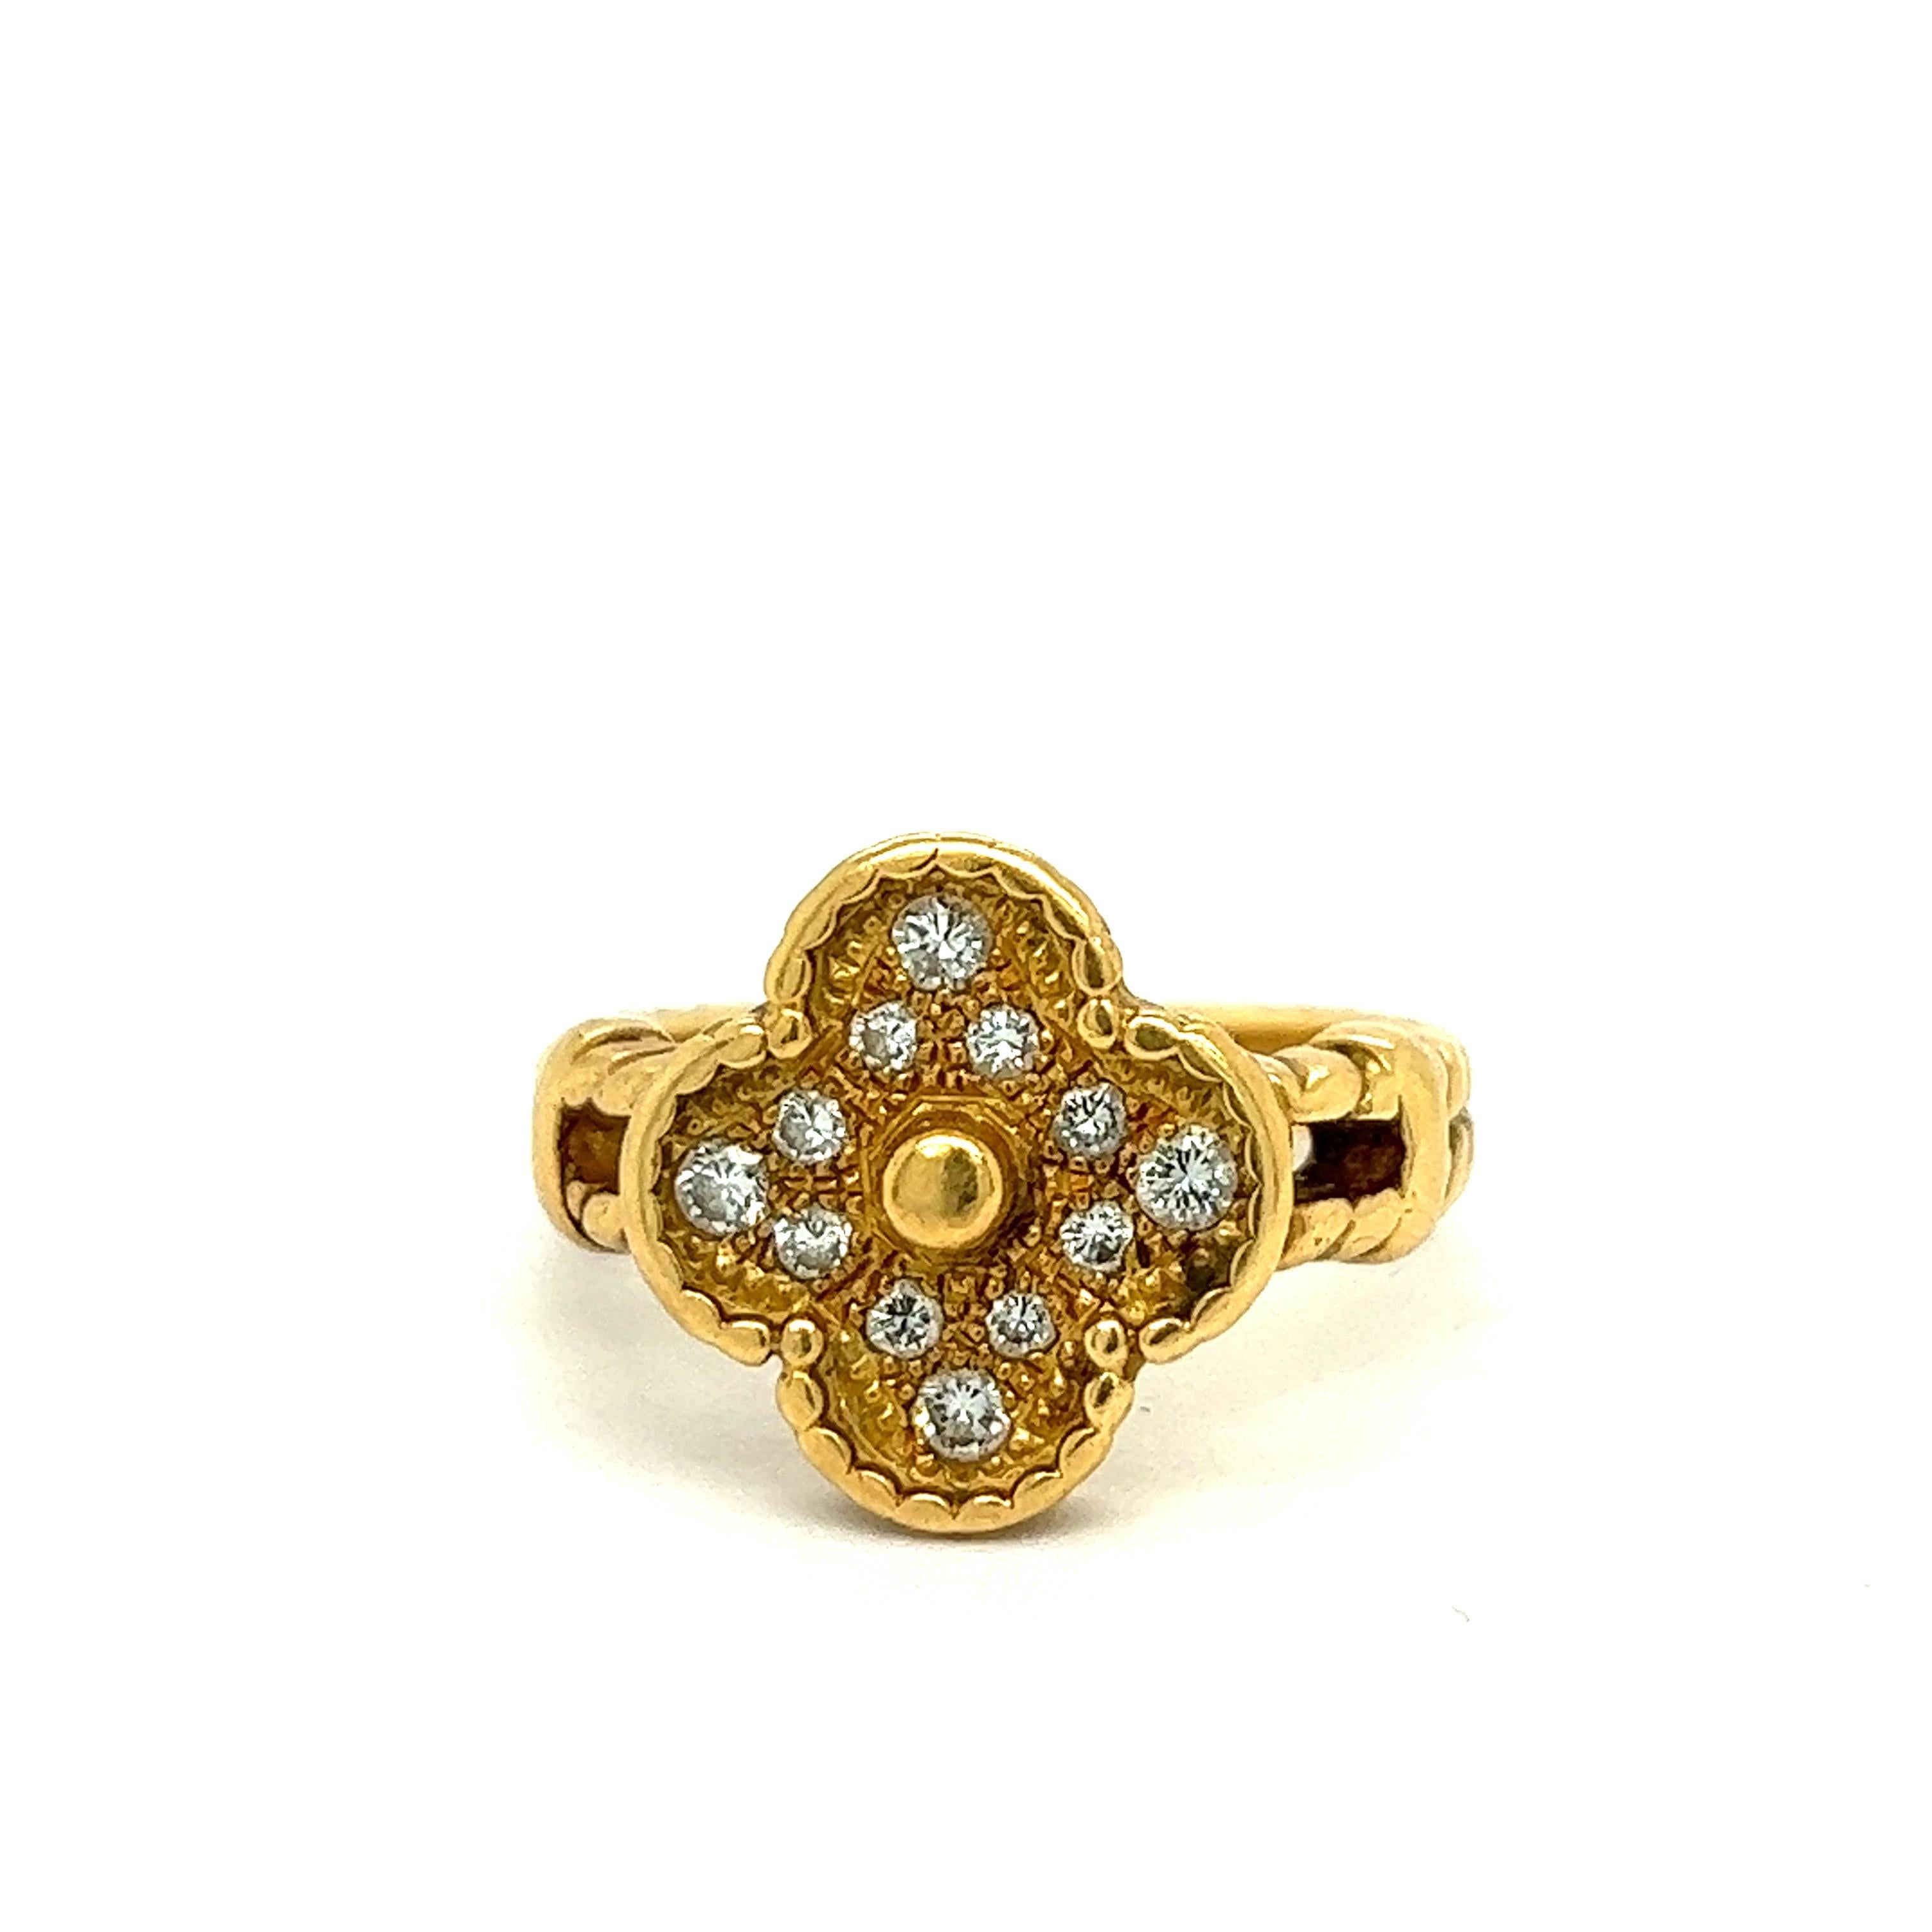 Contemporary Van Cleef & Arpels Alhambra 18k Yellow Gold Diamond Ring For Sale